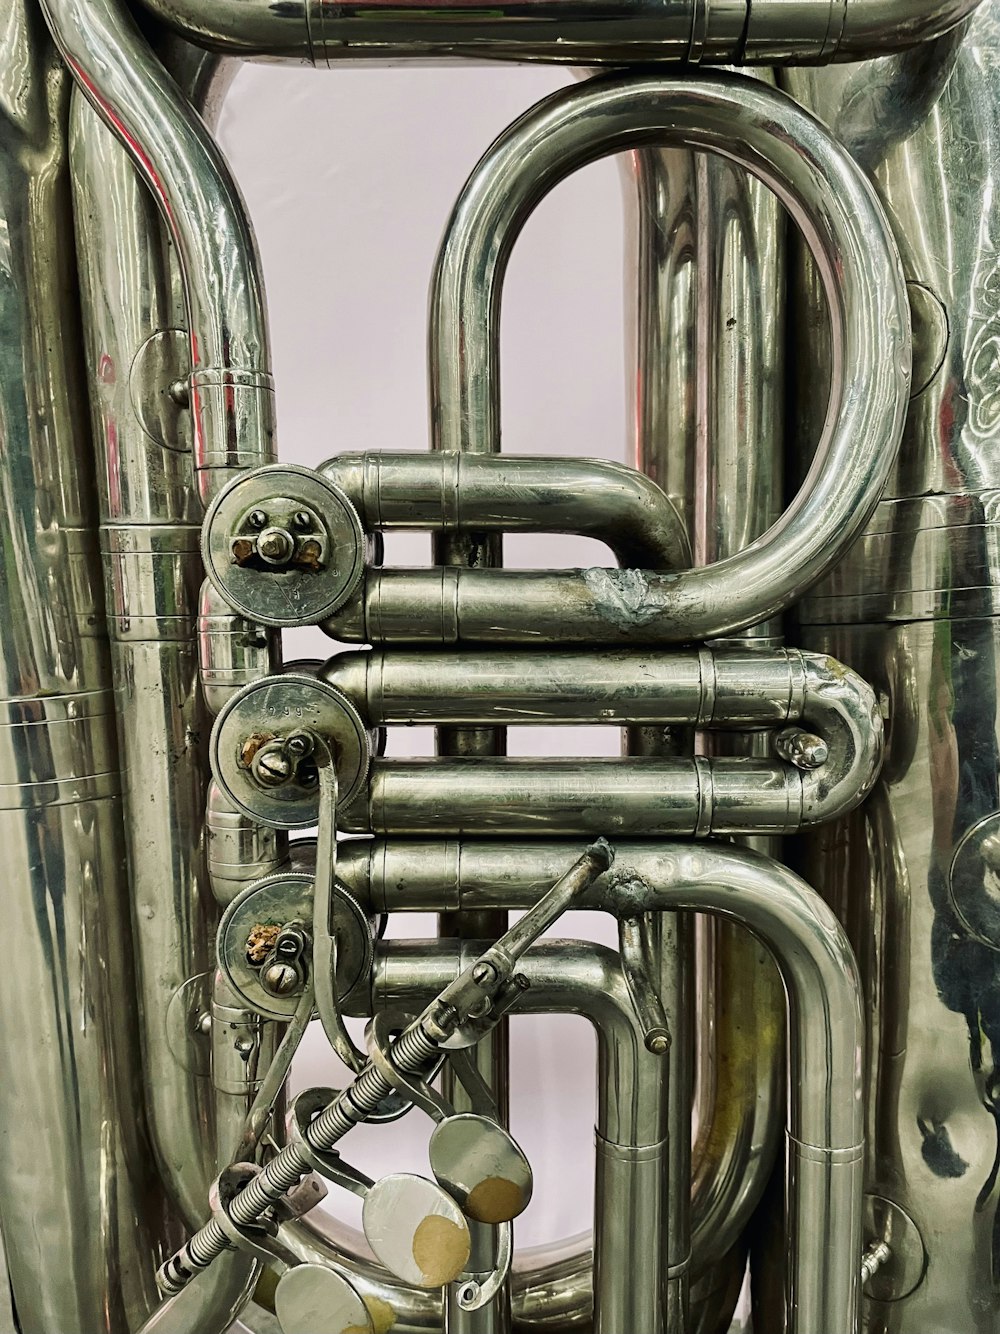 a close up of a silver instrument with many pipes